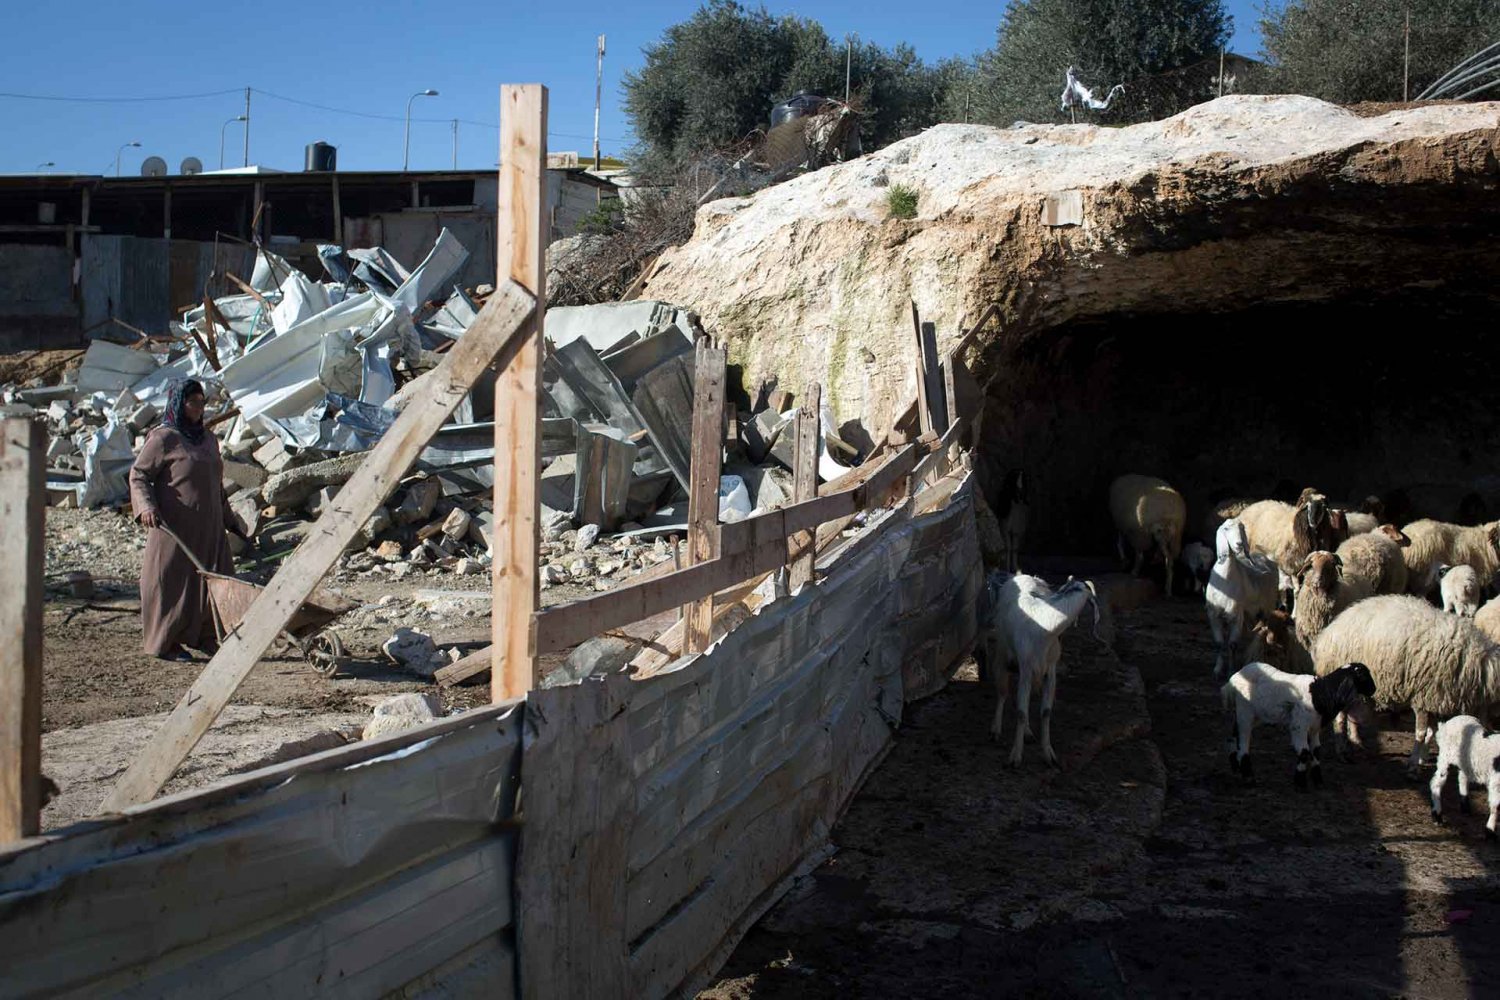 A woman tends to sheep next to a house demolished in a Jahalin Bedouin community within the E1 Development Plan, January 2015.